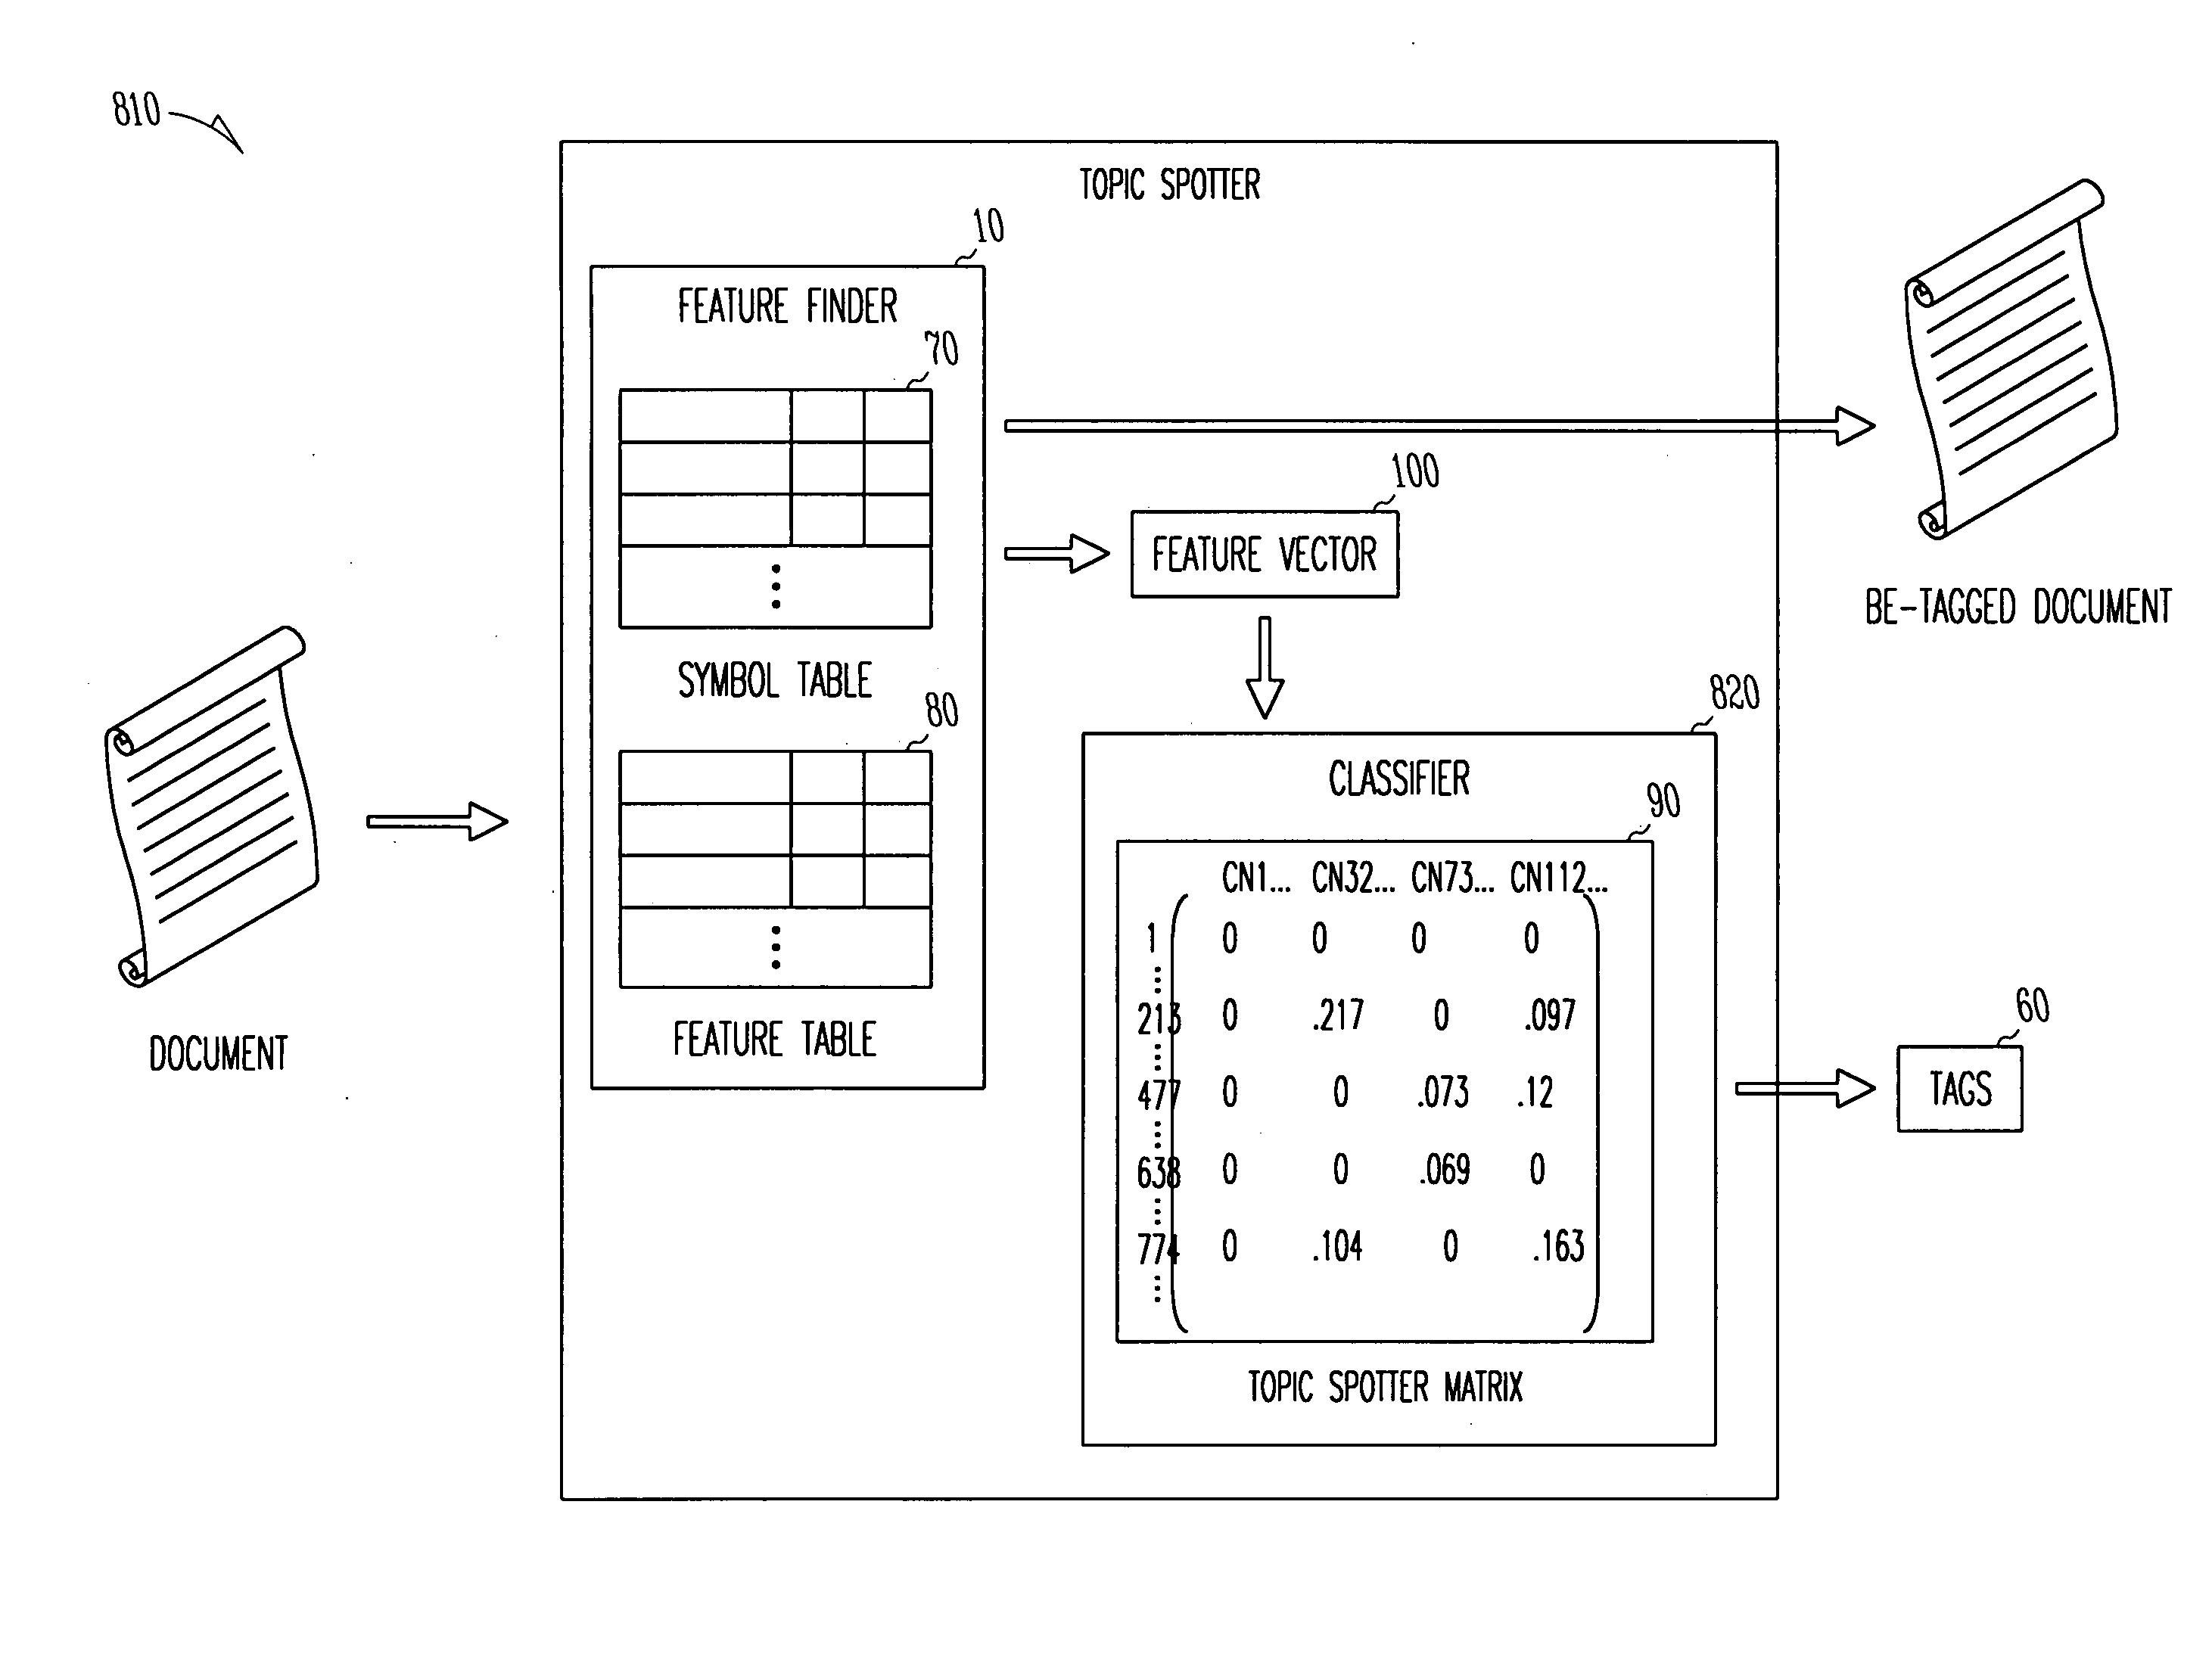 System and method for automatically classifying text